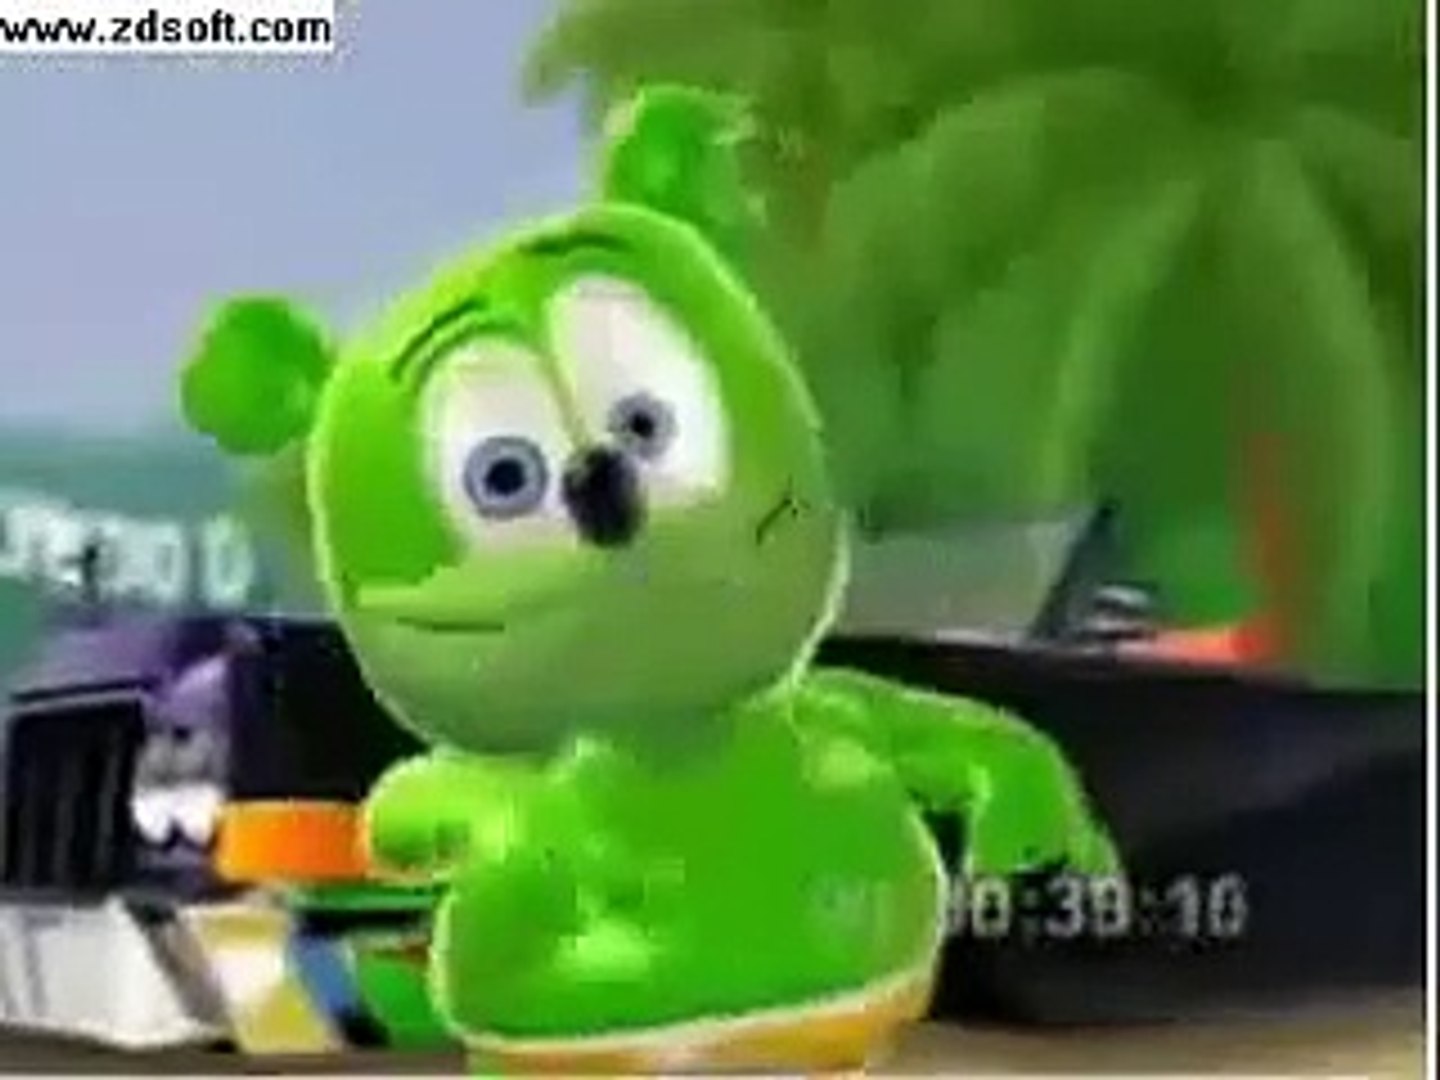 The Gummy Bear Song Long English Version_480p - video Dailymotion